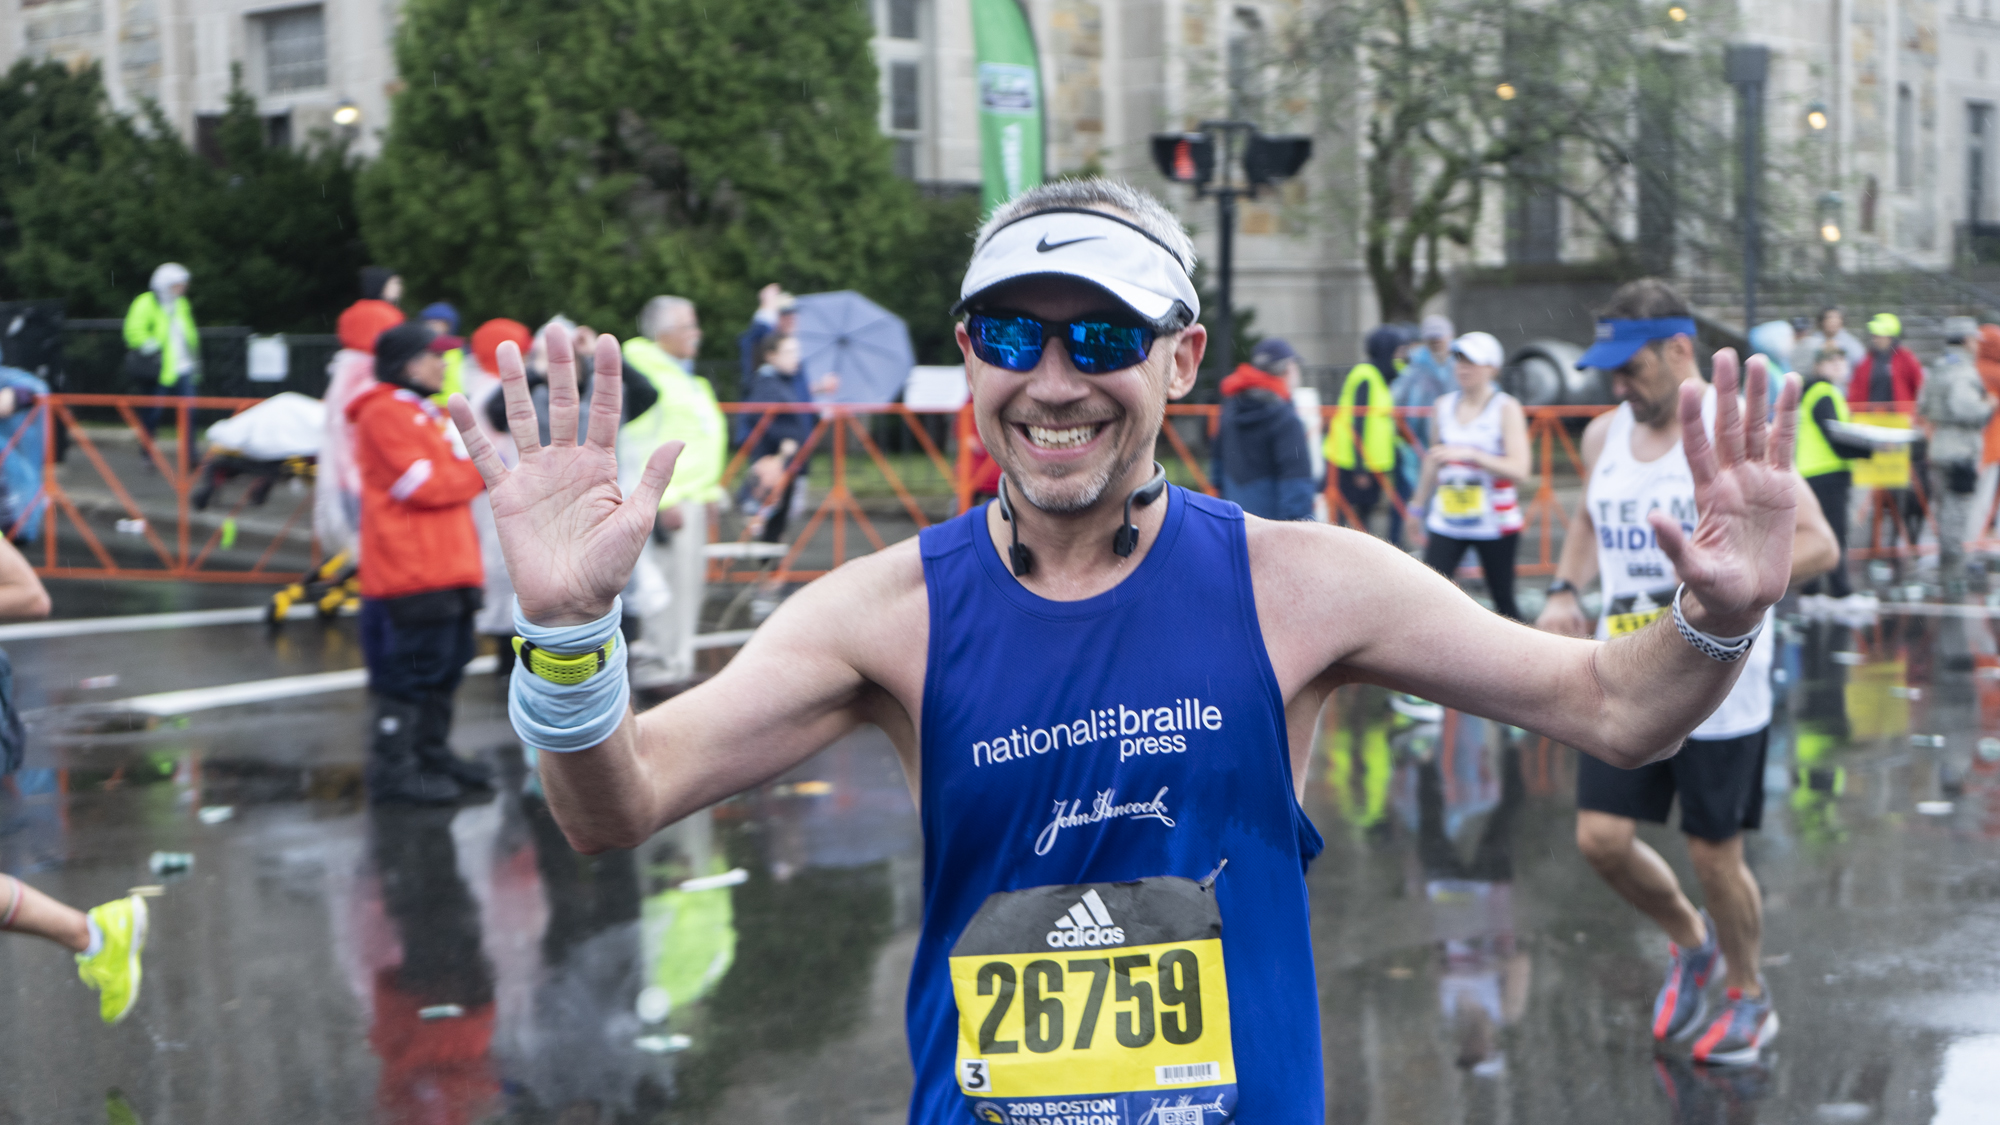 William Flynn smiling for the camera at mile 24 during the 2019 Boston Marathon